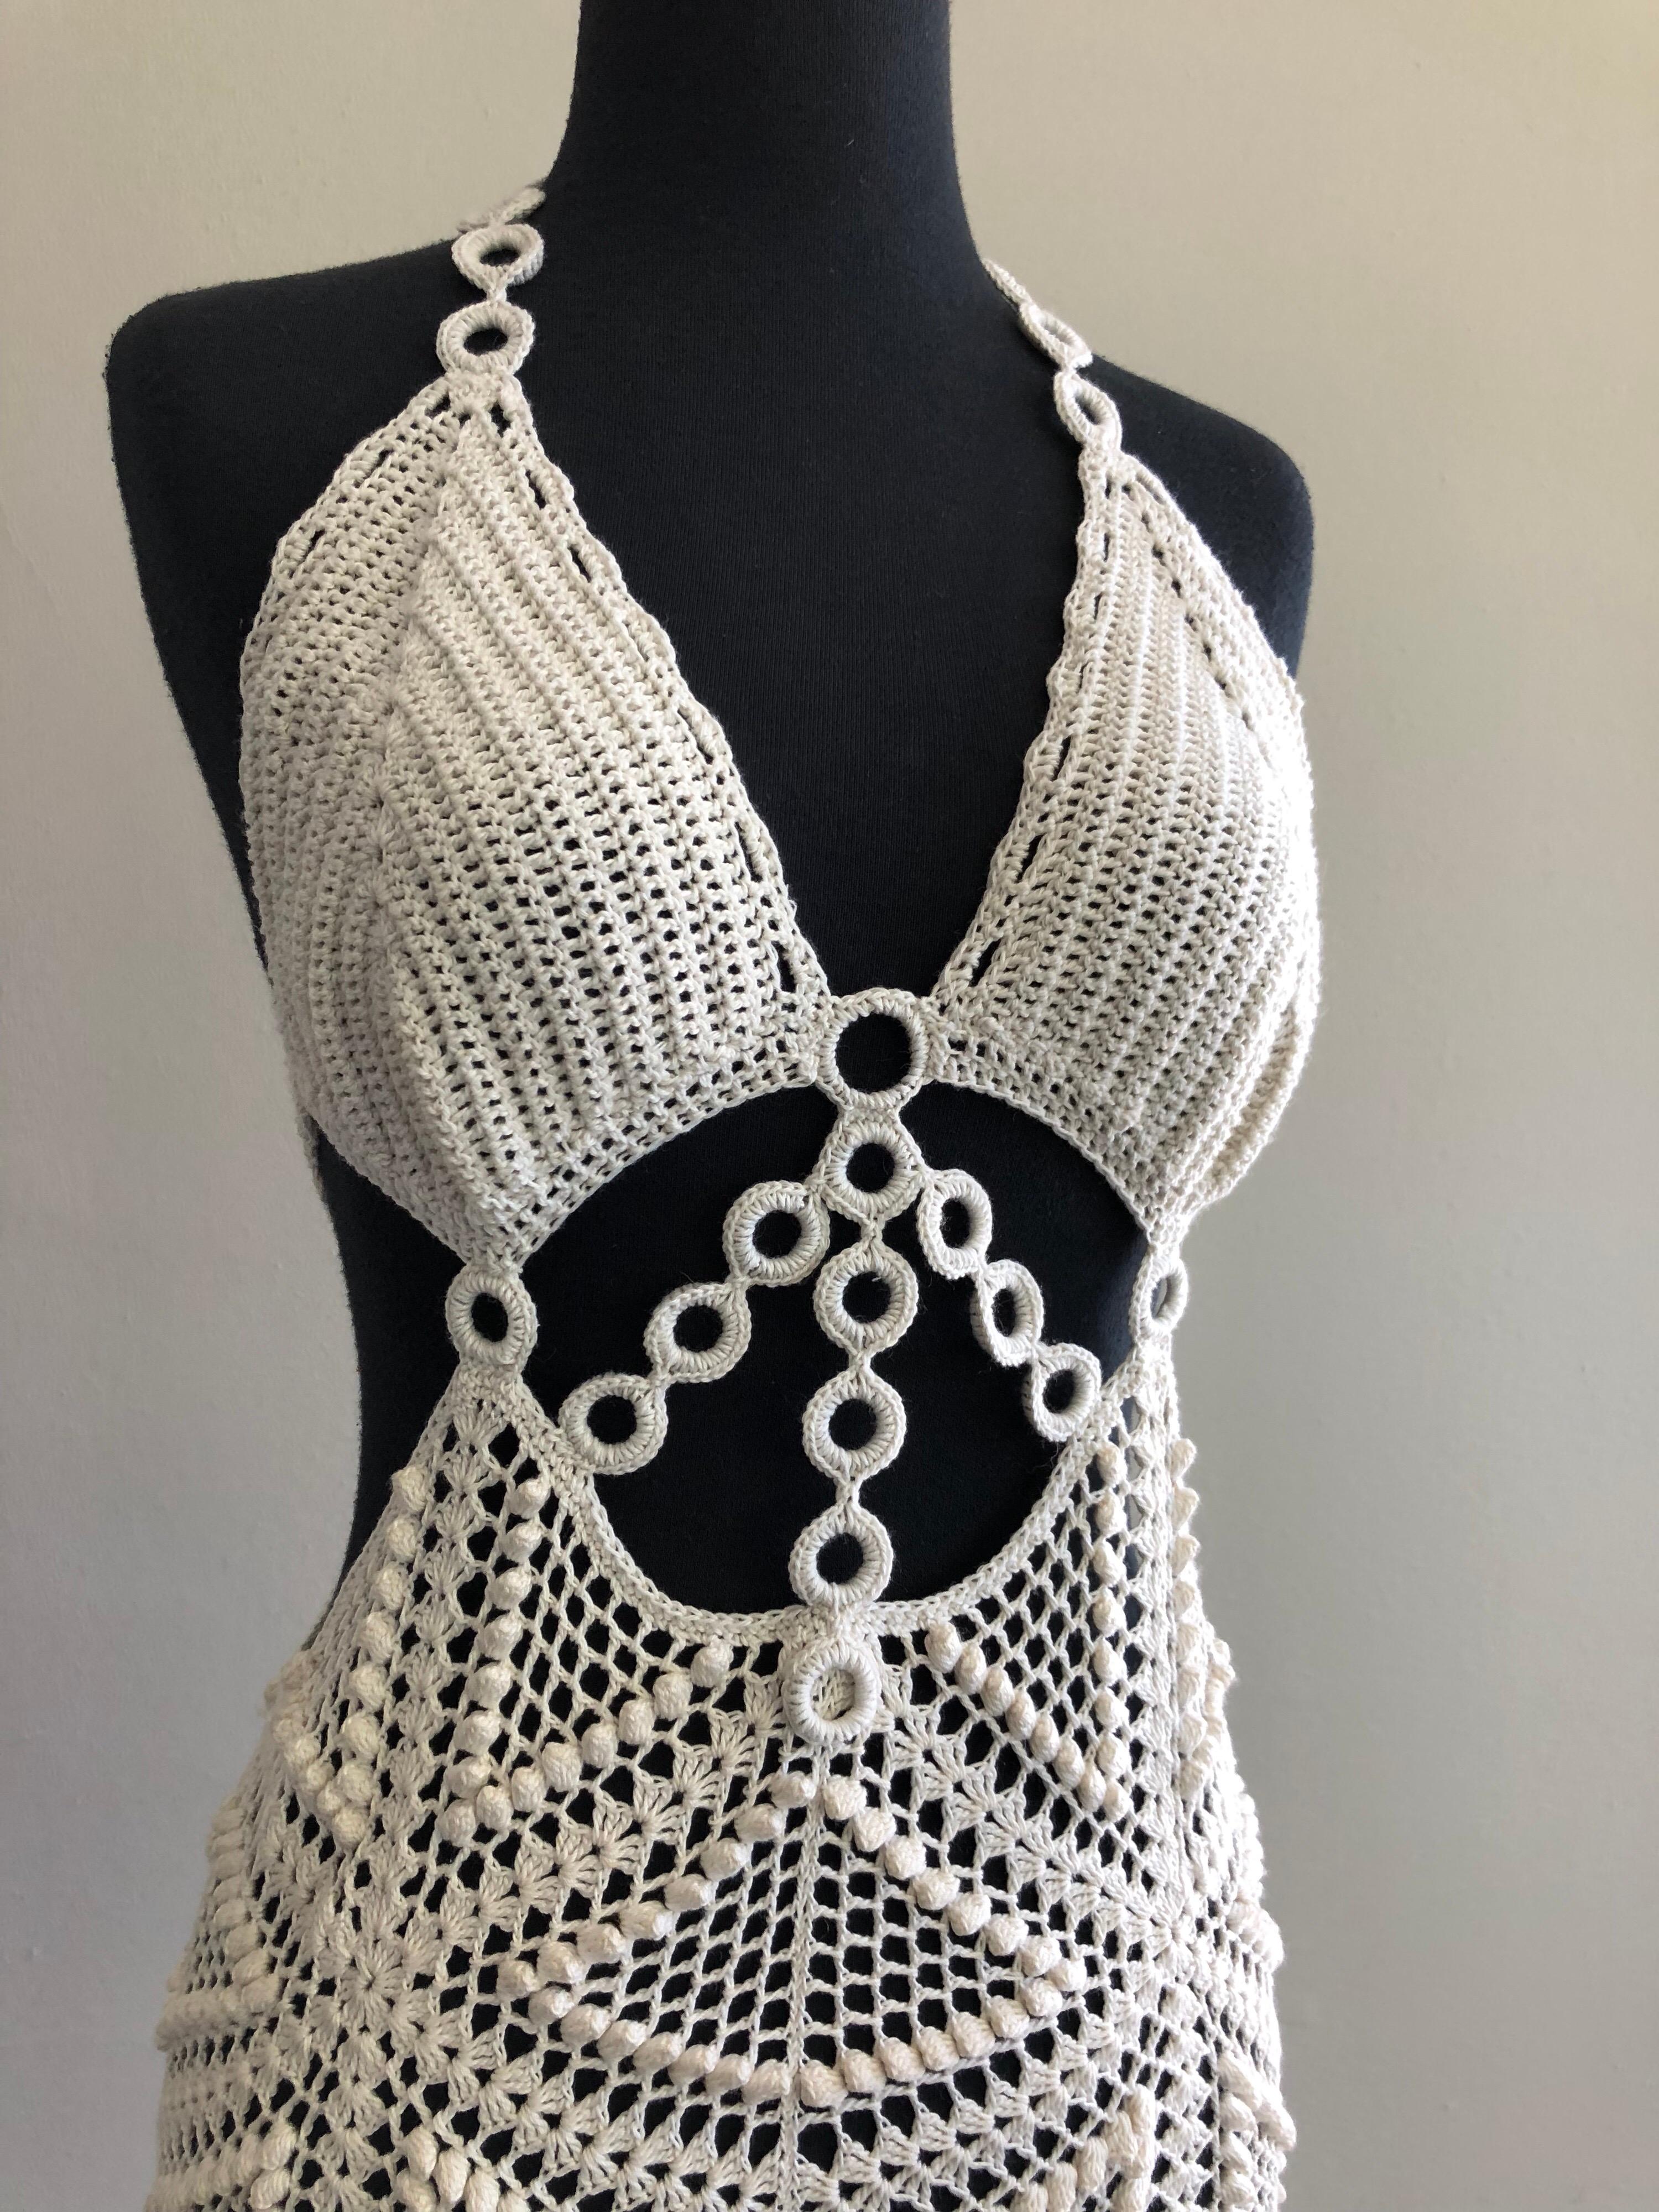 A fabulous 1960s/1970s-styled Summer of Love custom-made cotton crochet halter dress with open midriff accented with crochet ring chains, back tie closure and fringed hemline. Keep cool in beautiful laid-back style! 